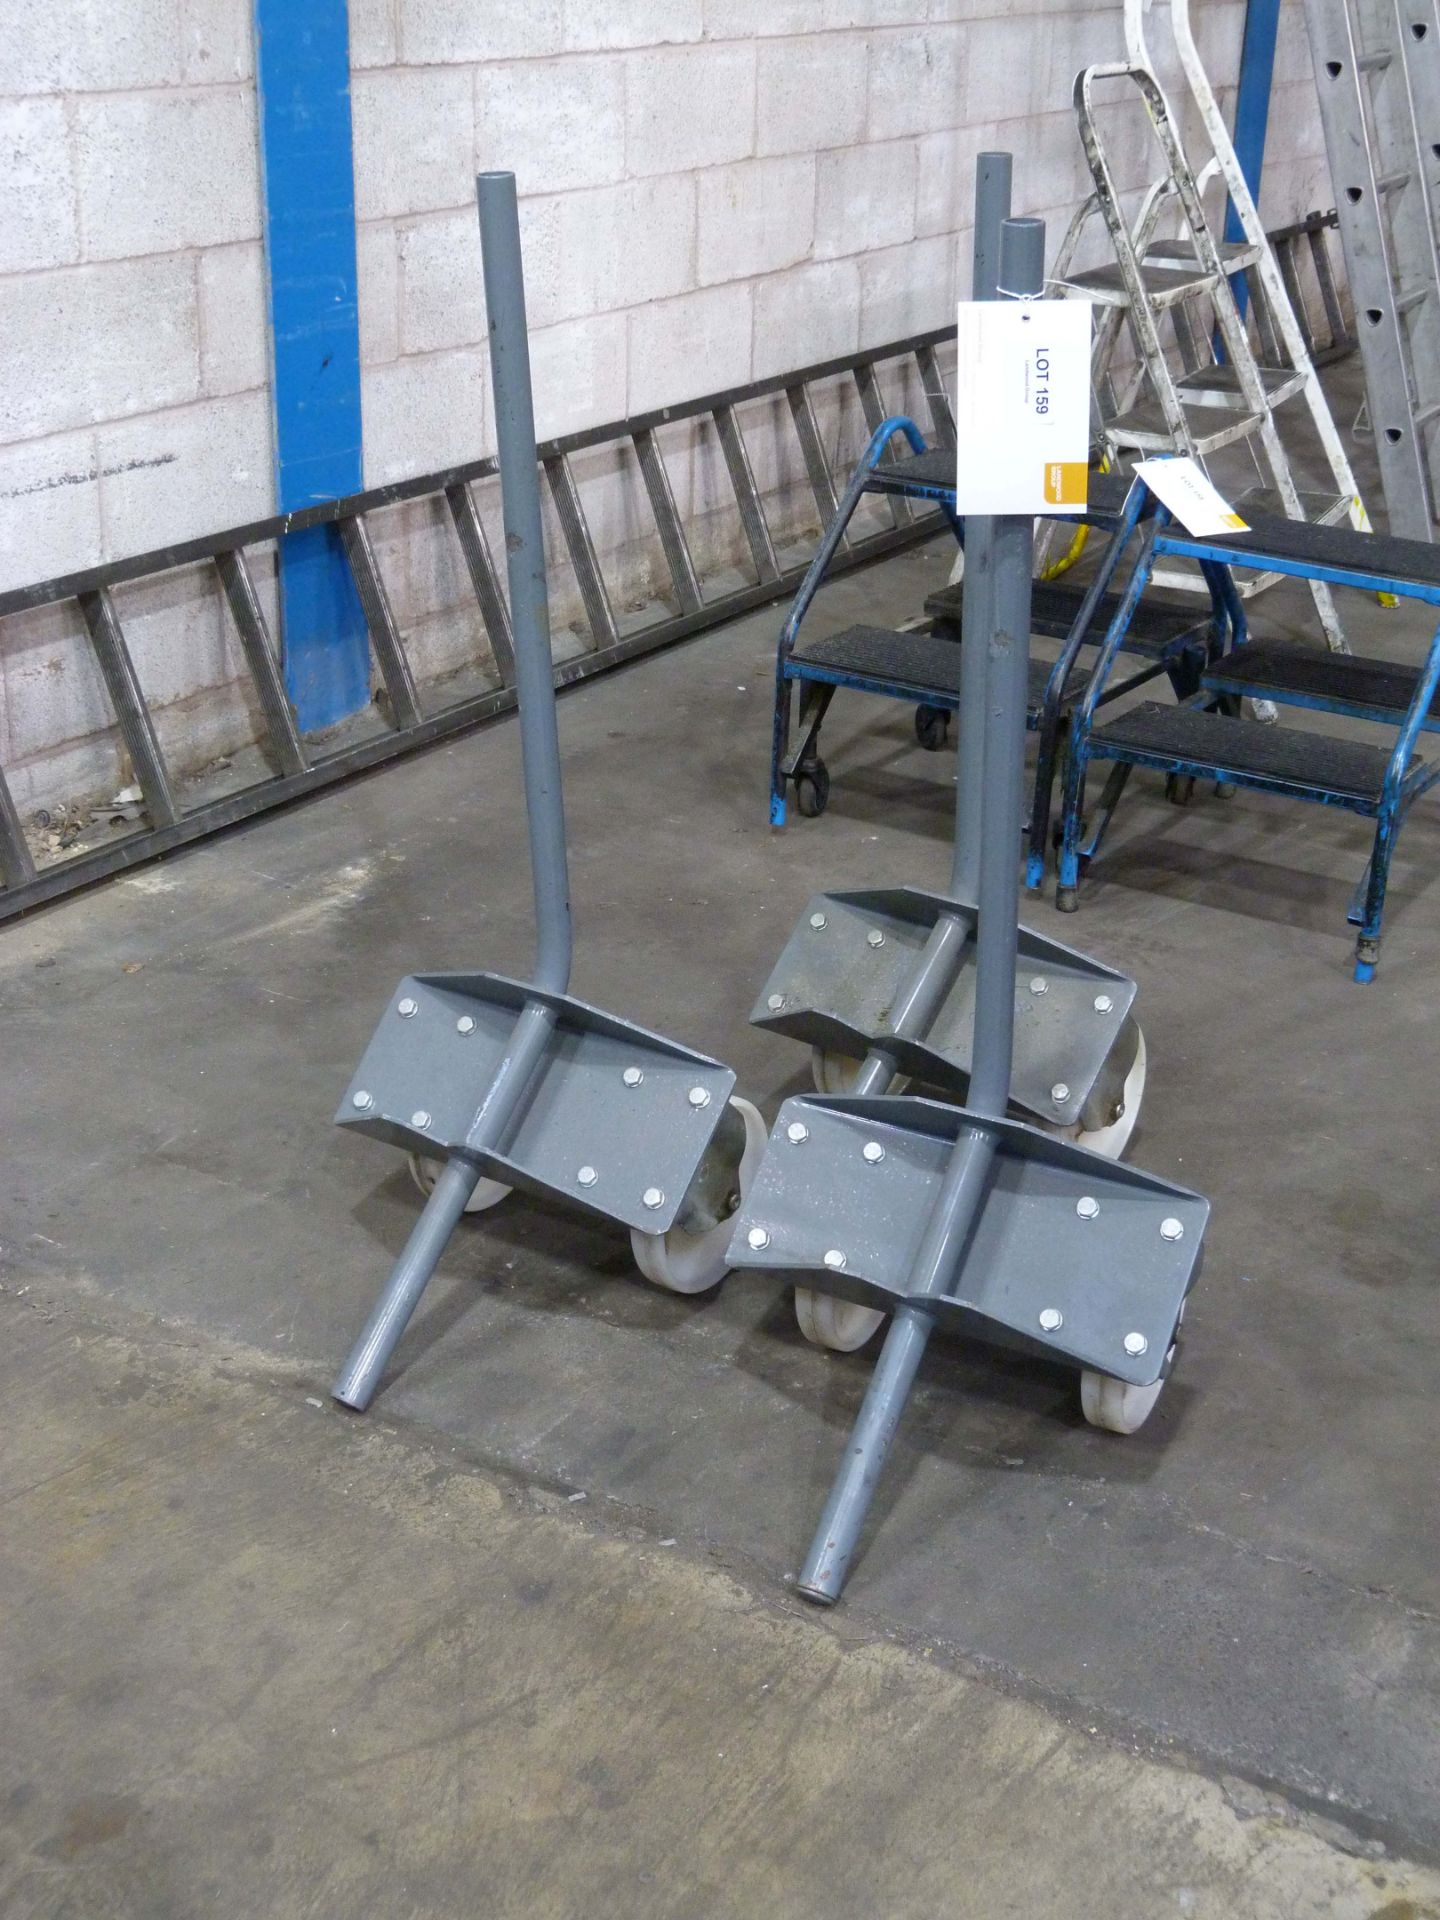 3 Wheeled Trollies for moving press rollers